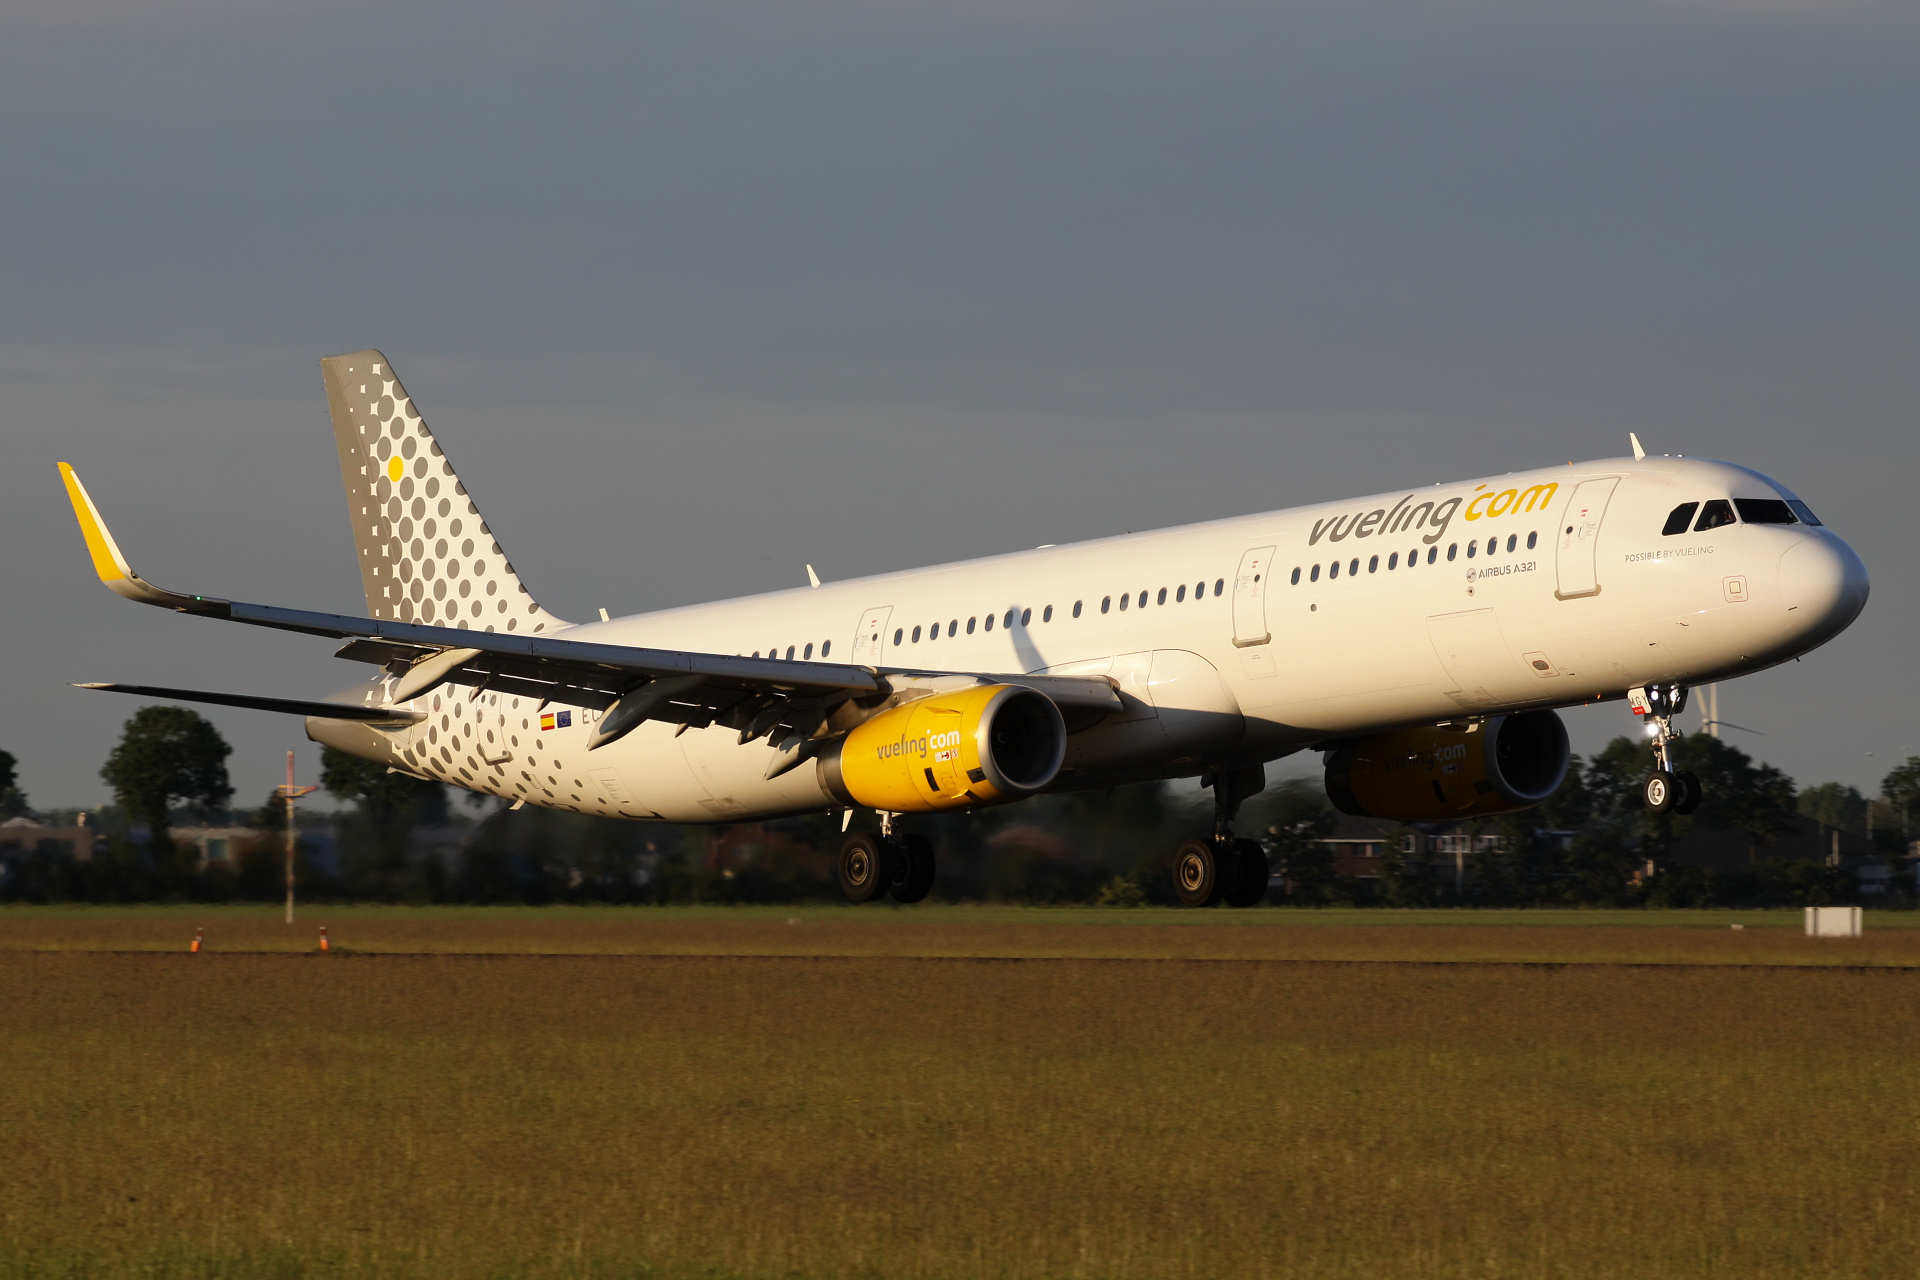 EC-MGY, Vueling Airlines (Samoloty » Spotting na Schiphol » Airbus A321-200)